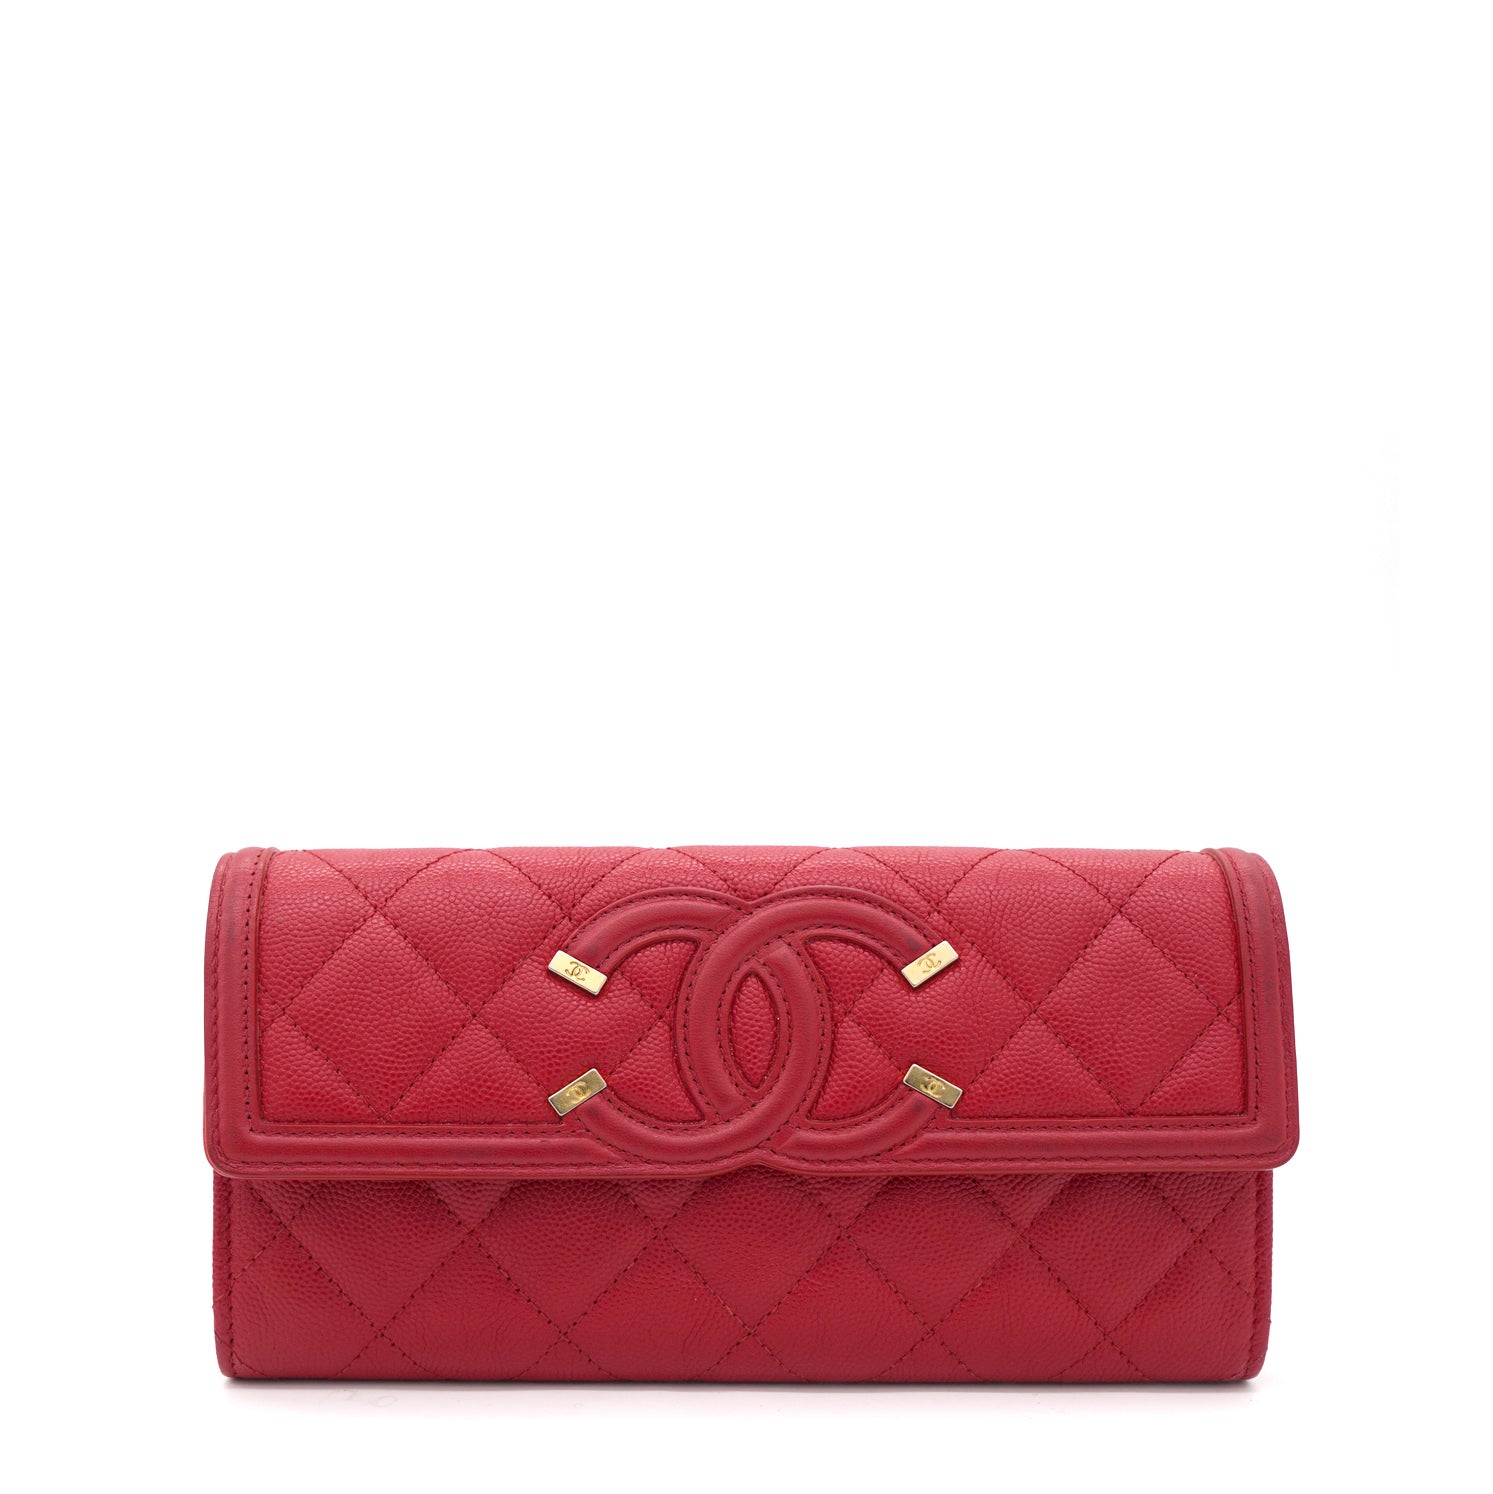 Chanel Caviar Quilted Large Filigree Gusset Flap Wallet Red